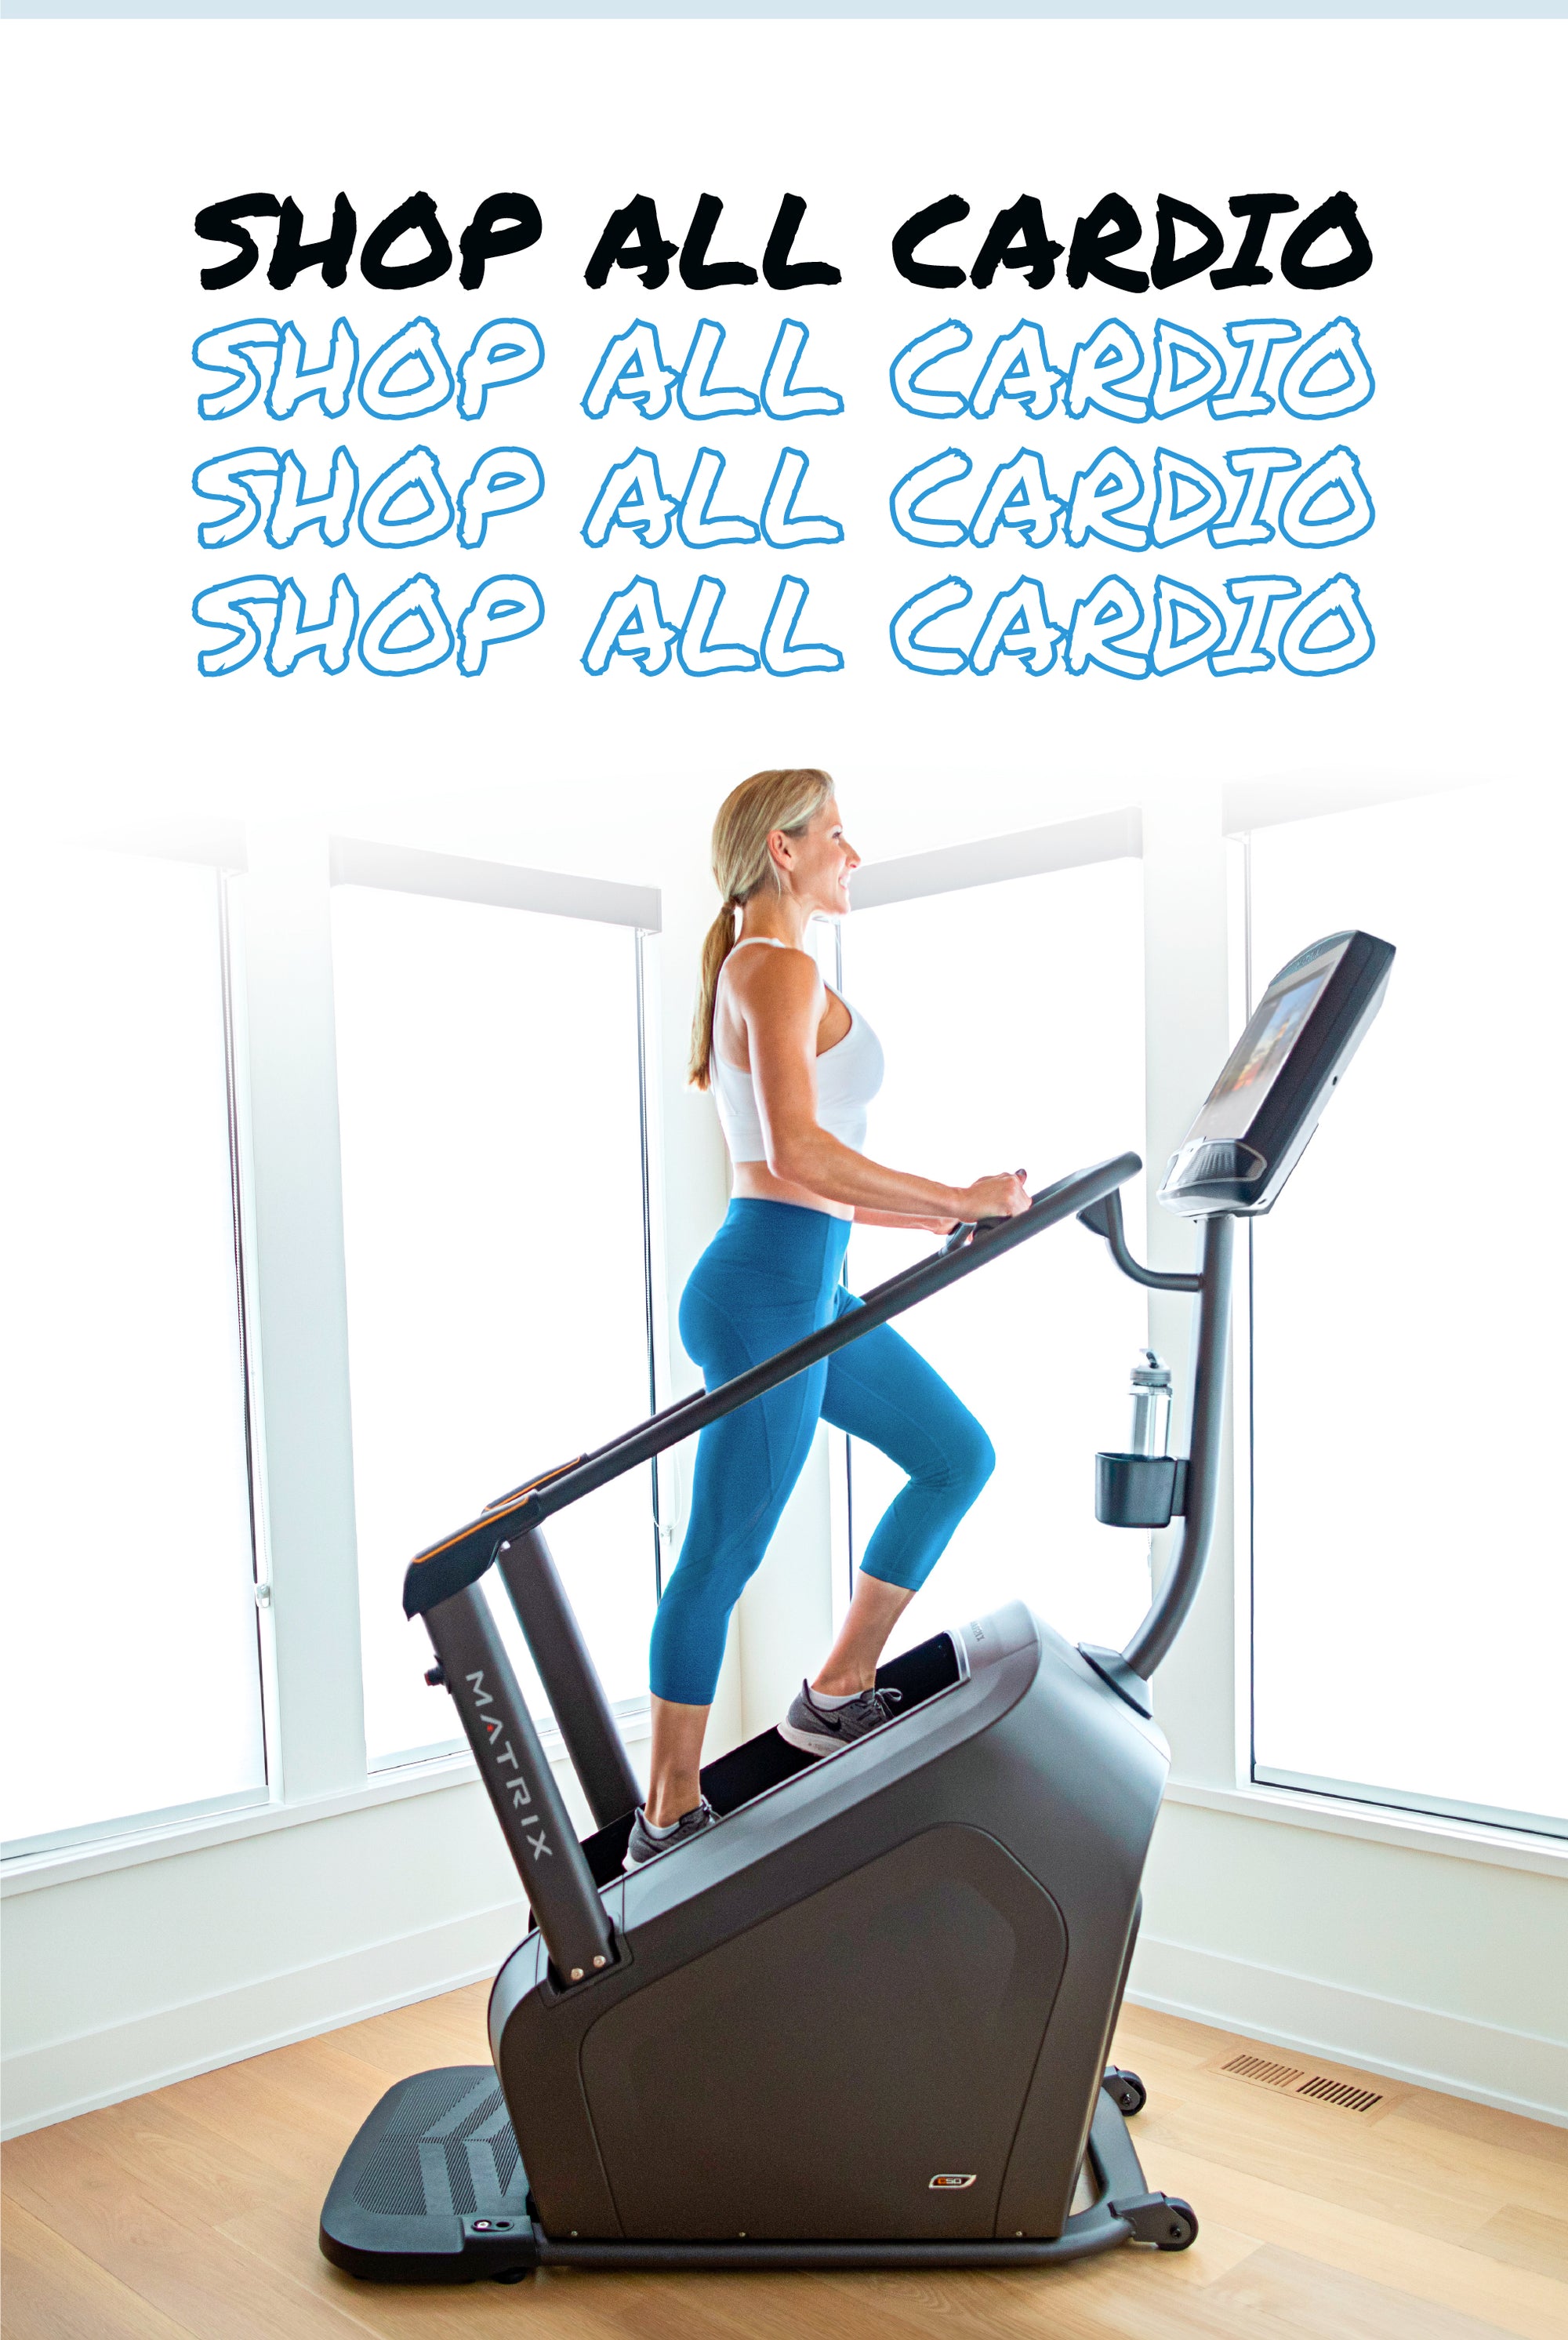 Canadian fitness equipment store, Fitness Experience is your home for cardio equipment like treadmills, ellipticals, spin bikes, indoor rowers, rowing machines and more.